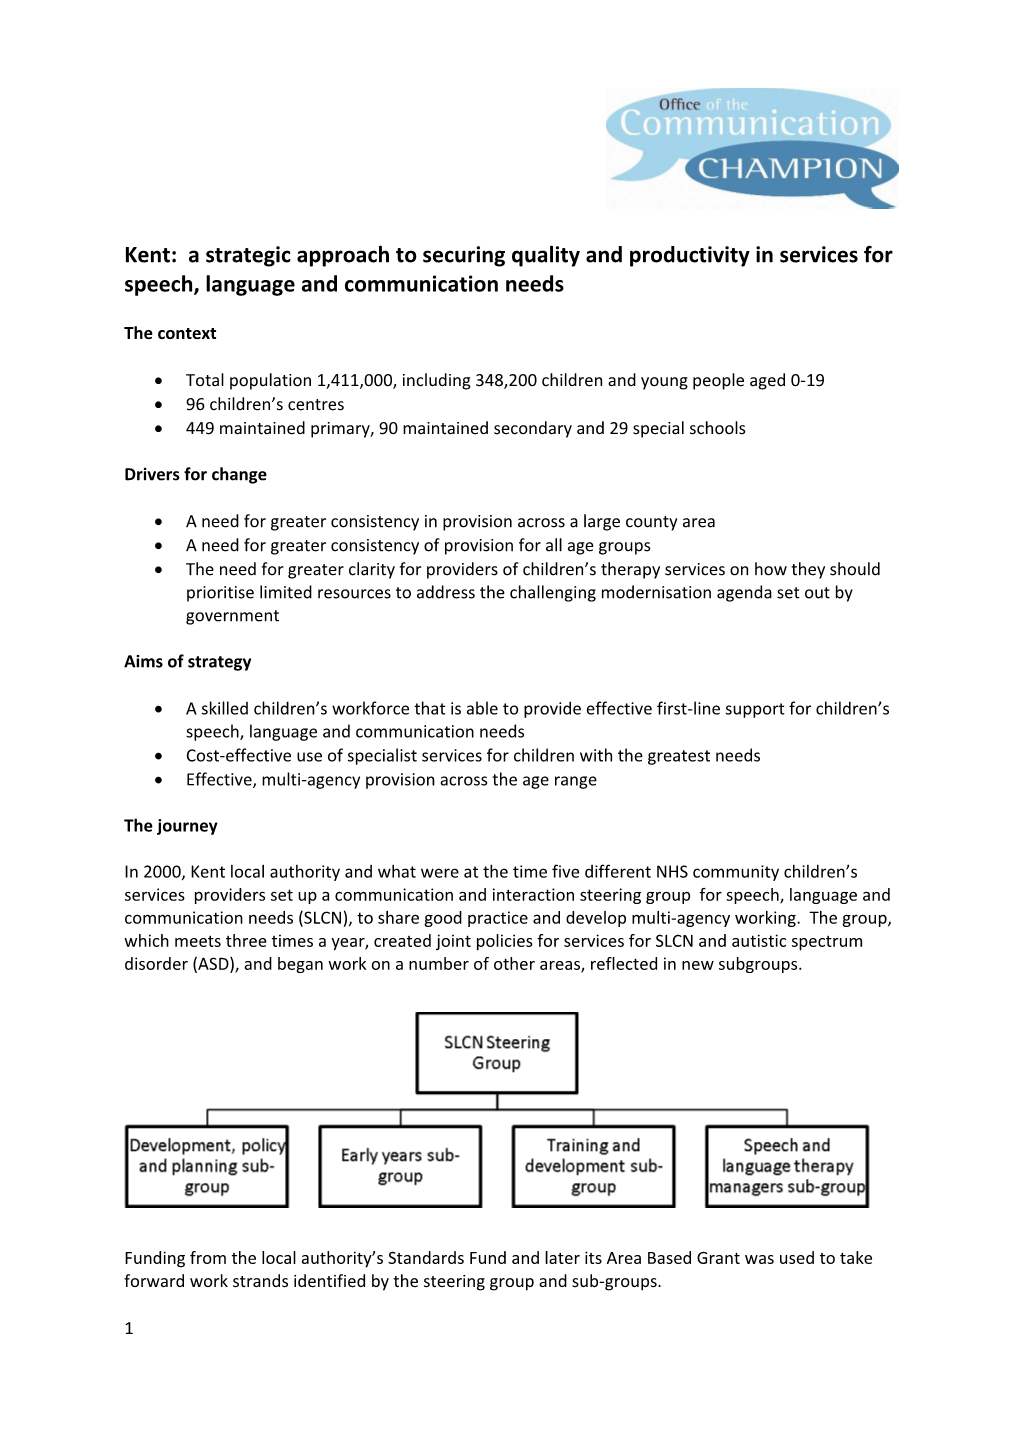 Kent: a Strategic Approach to Securing Quality and Productivity in Services for Speech